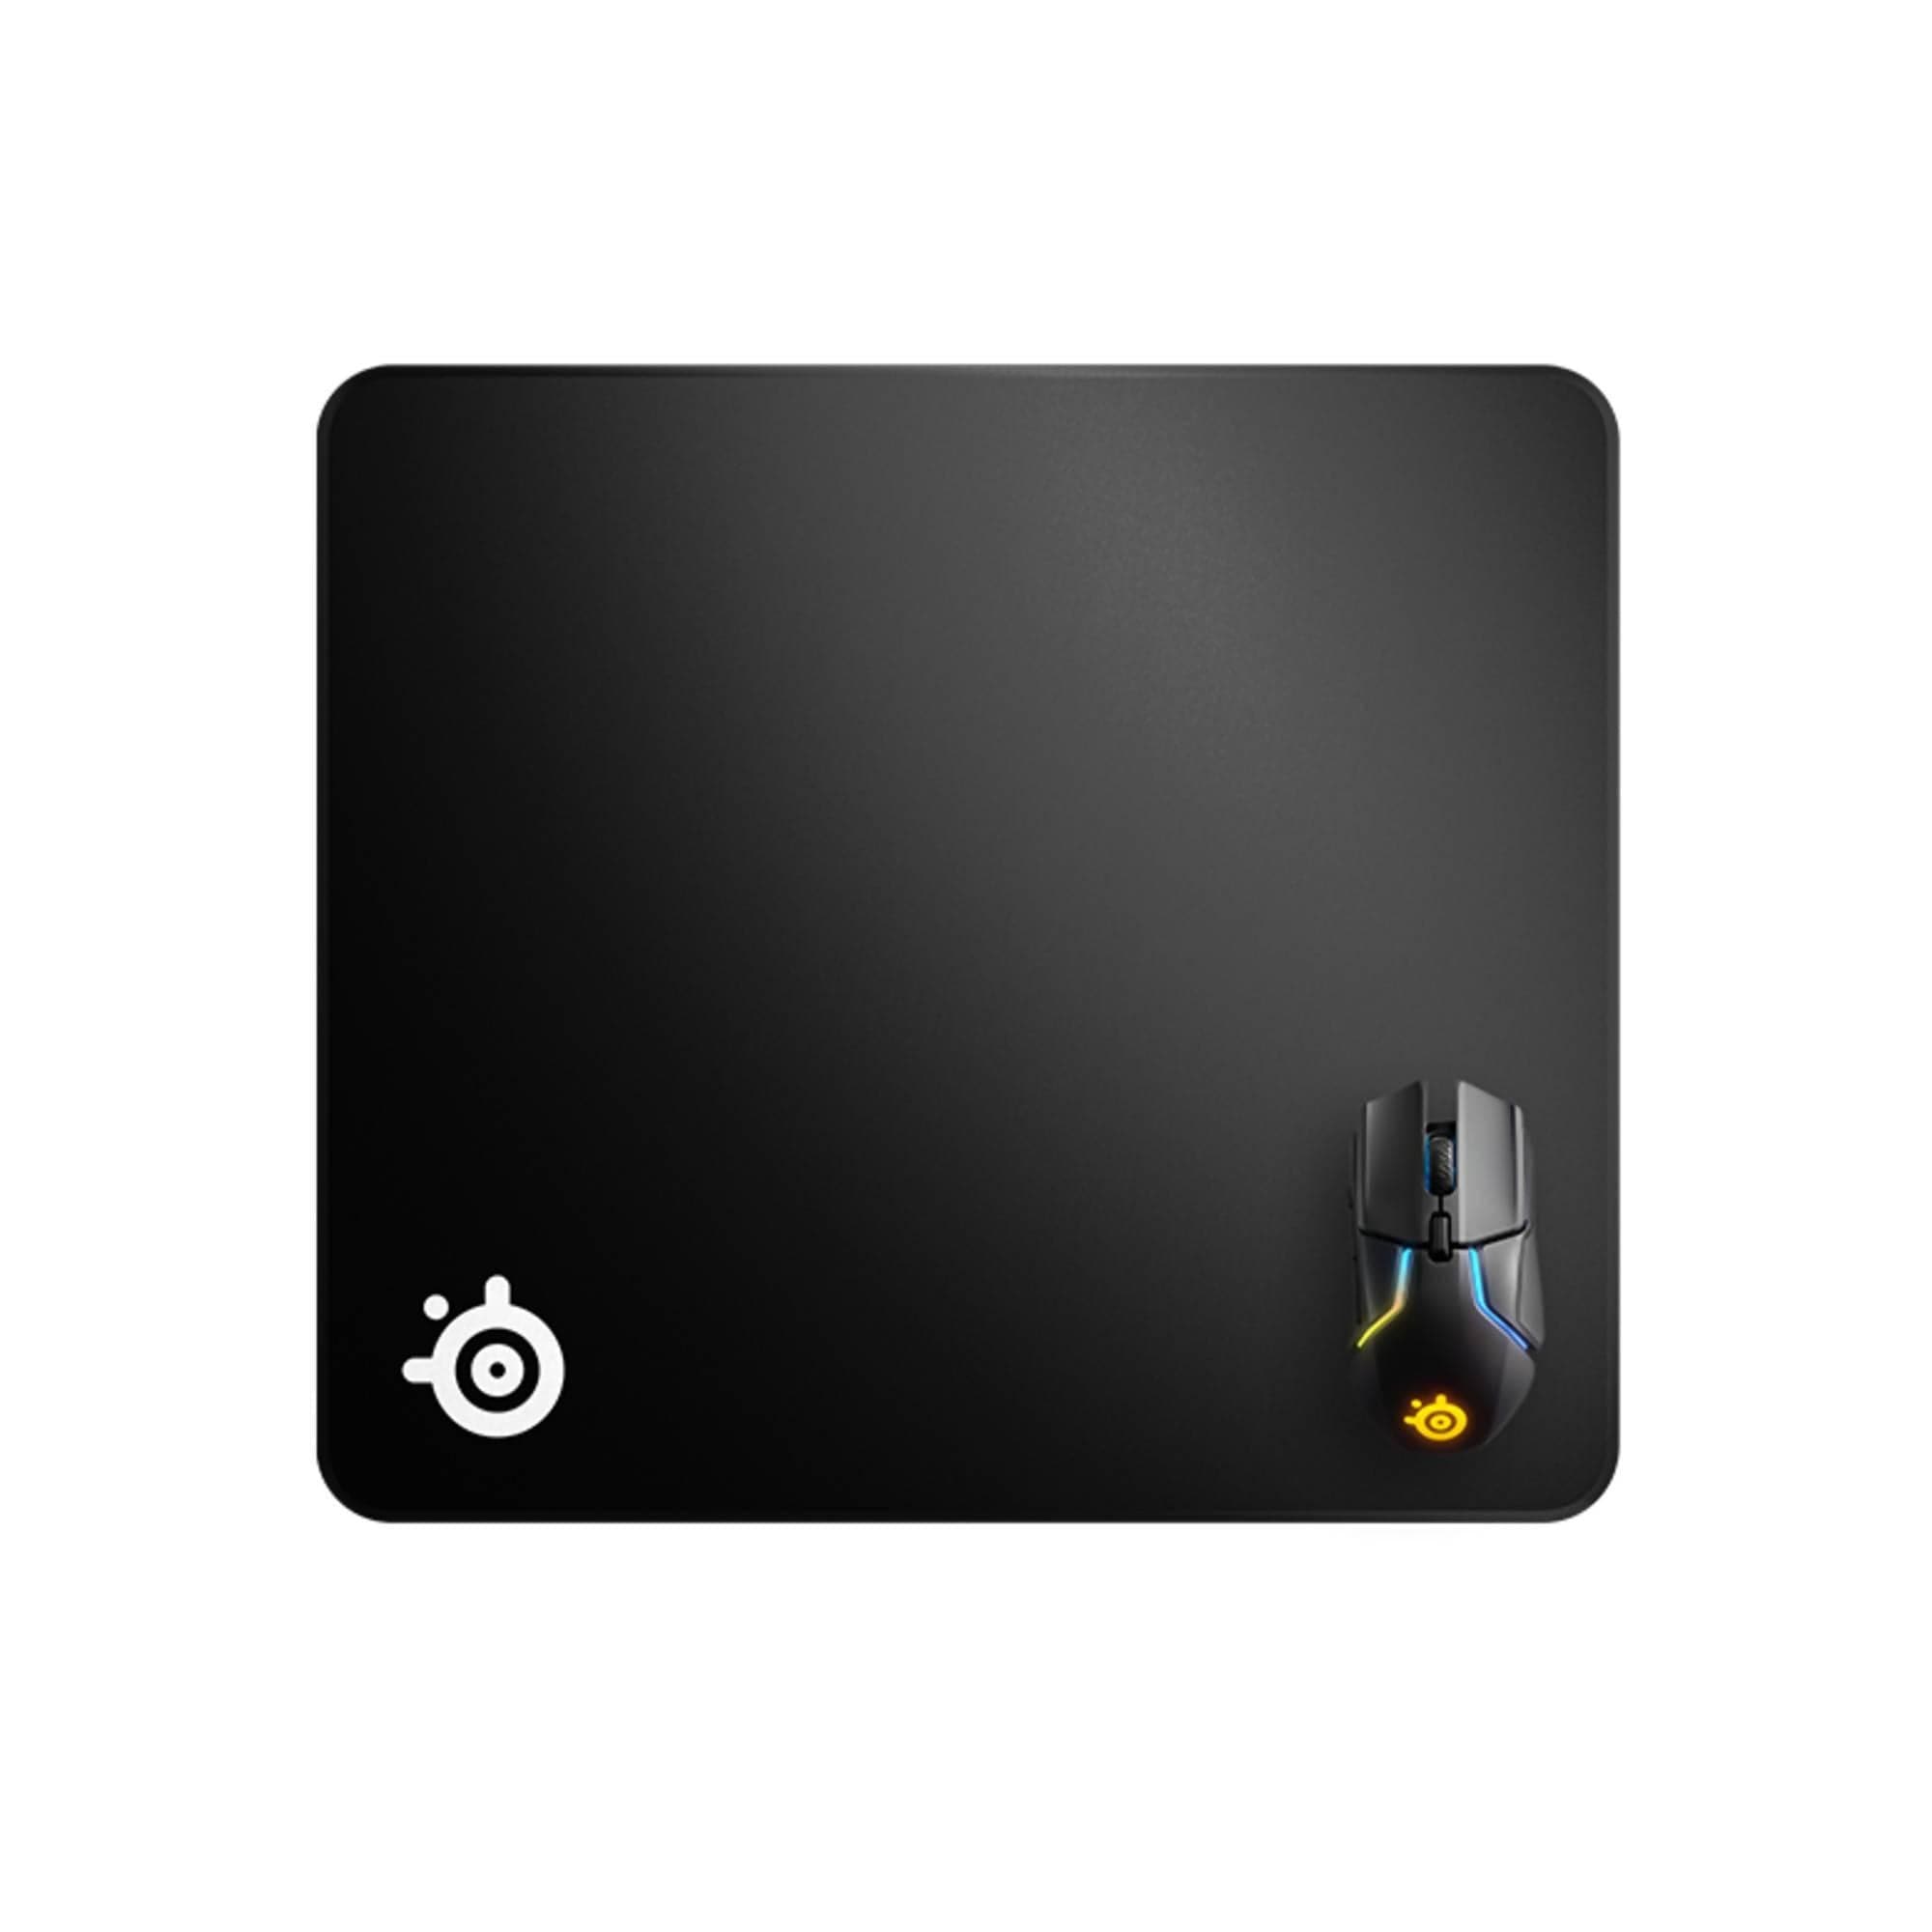 Steelseries QcK Edge Large Gaming Mouse Pad - Winstore